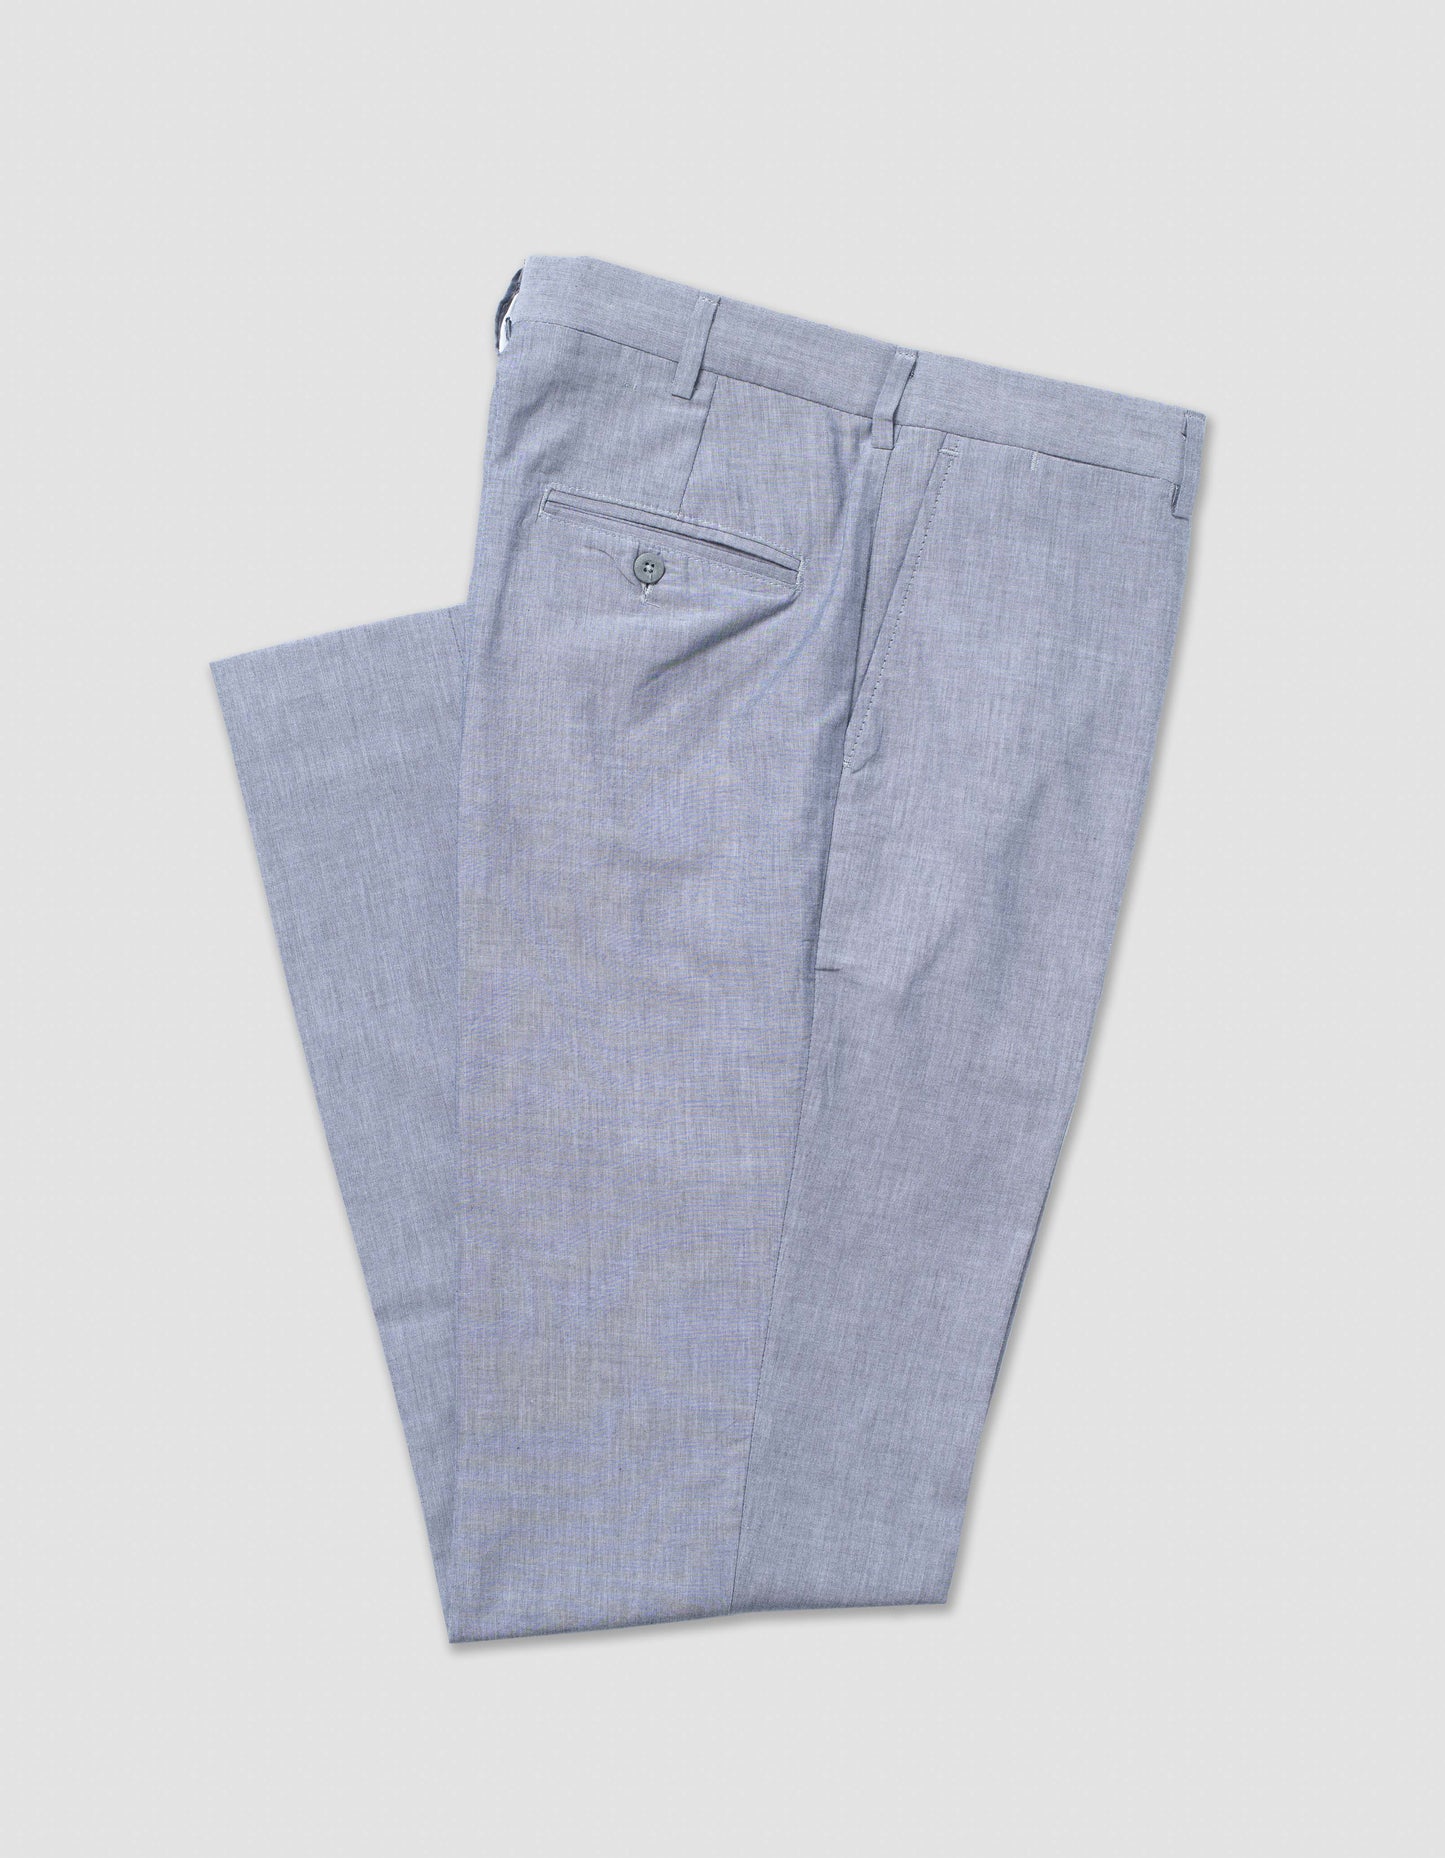 NAVY CHAMBRAY PANT - CLASSIC FIT